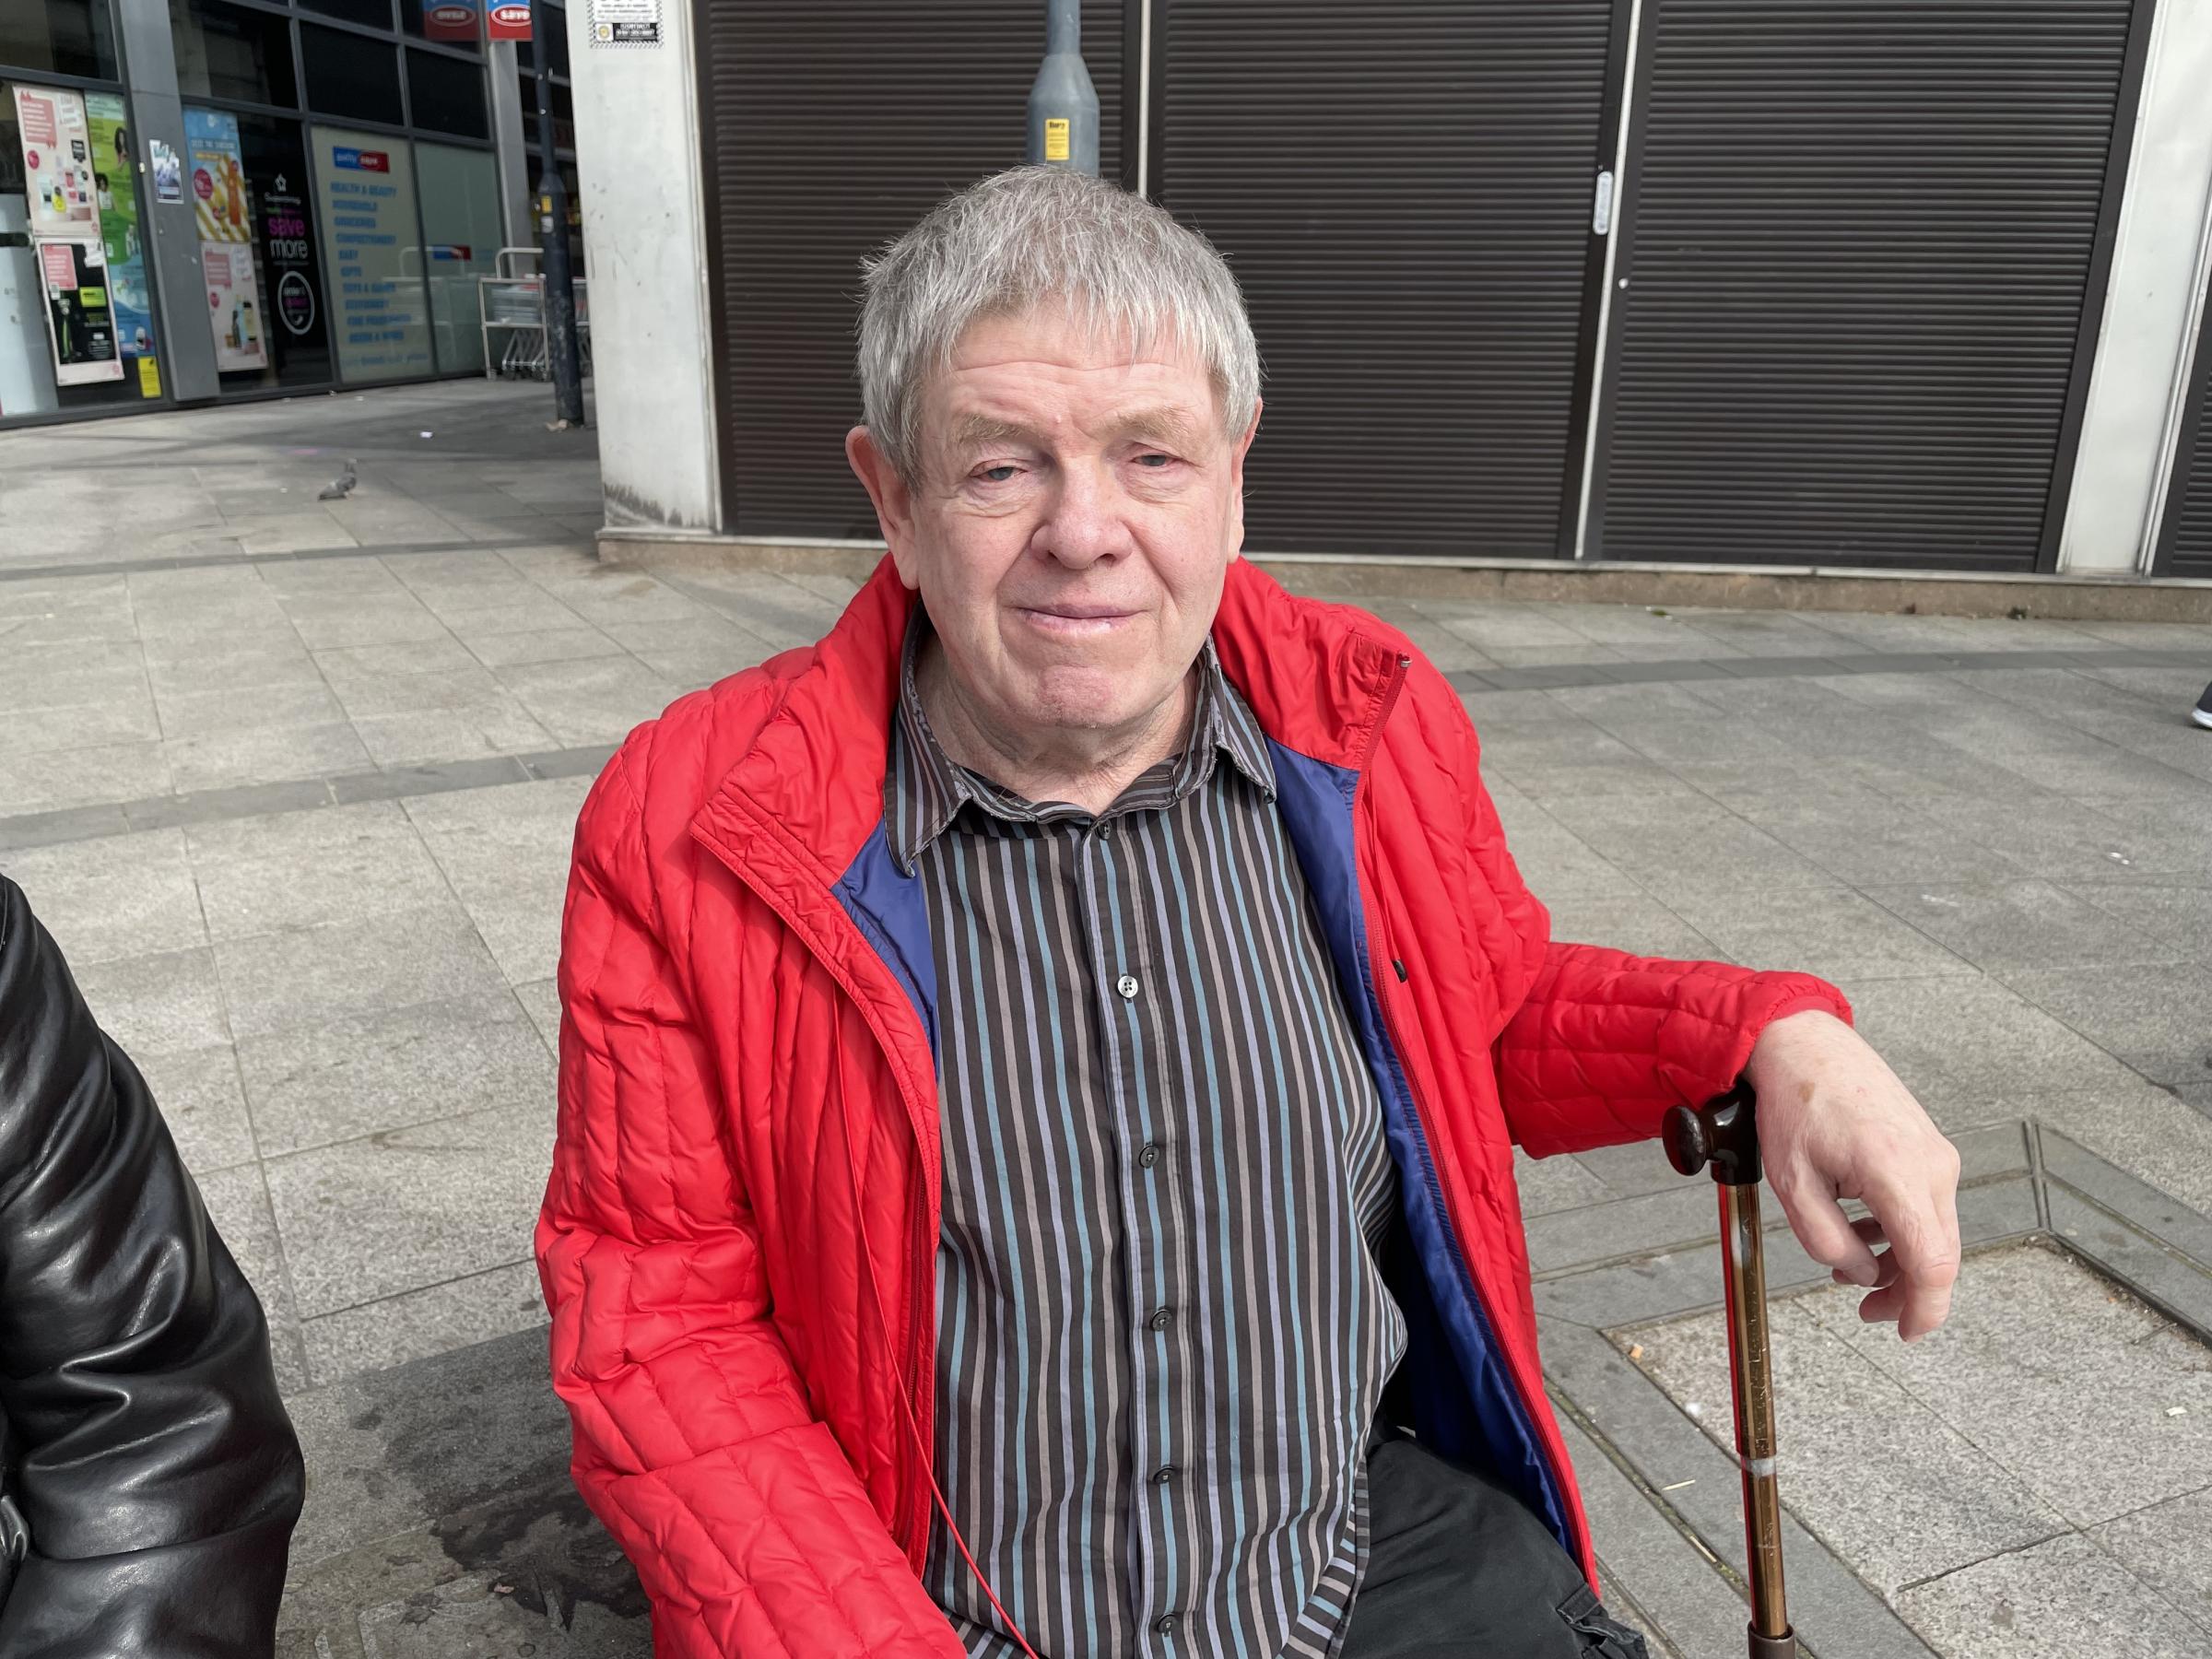 Simister resident Michael McNally, 83, said he was devastated at the loss of the Longfield Suite venue where he used to go dancing hundreds of times.